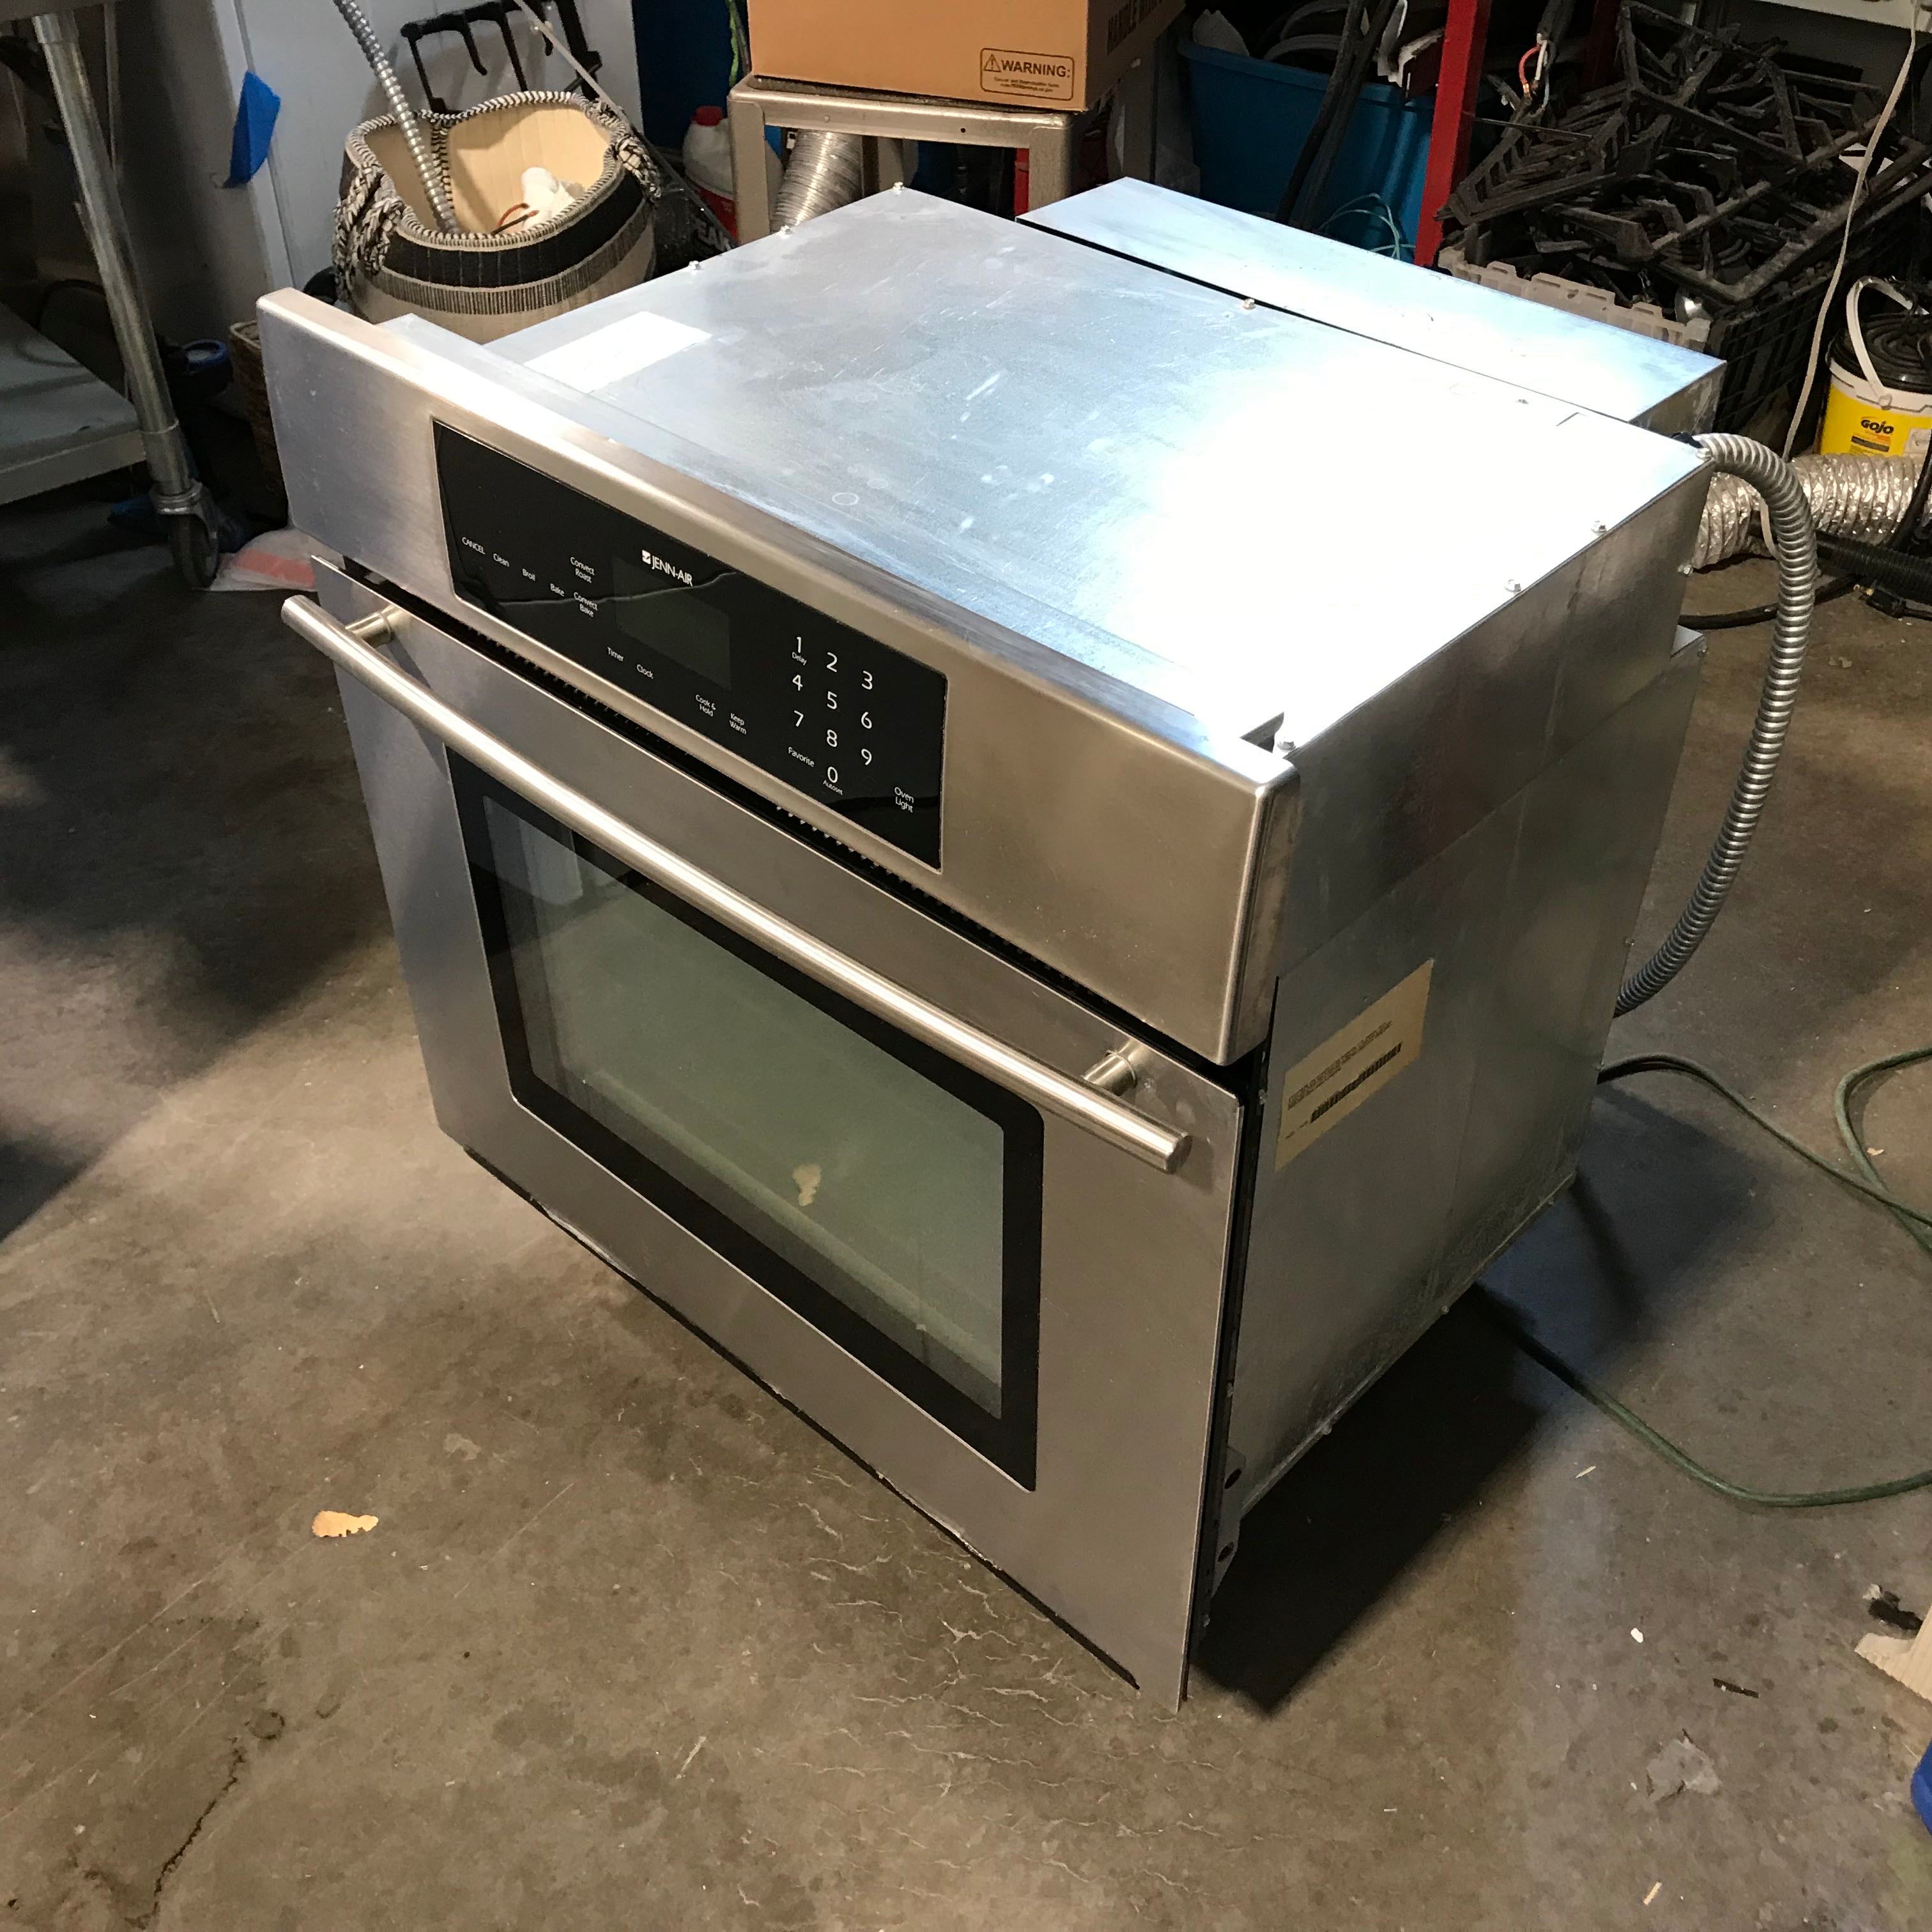 Jenn-Air Stainless Steel Wall Oven